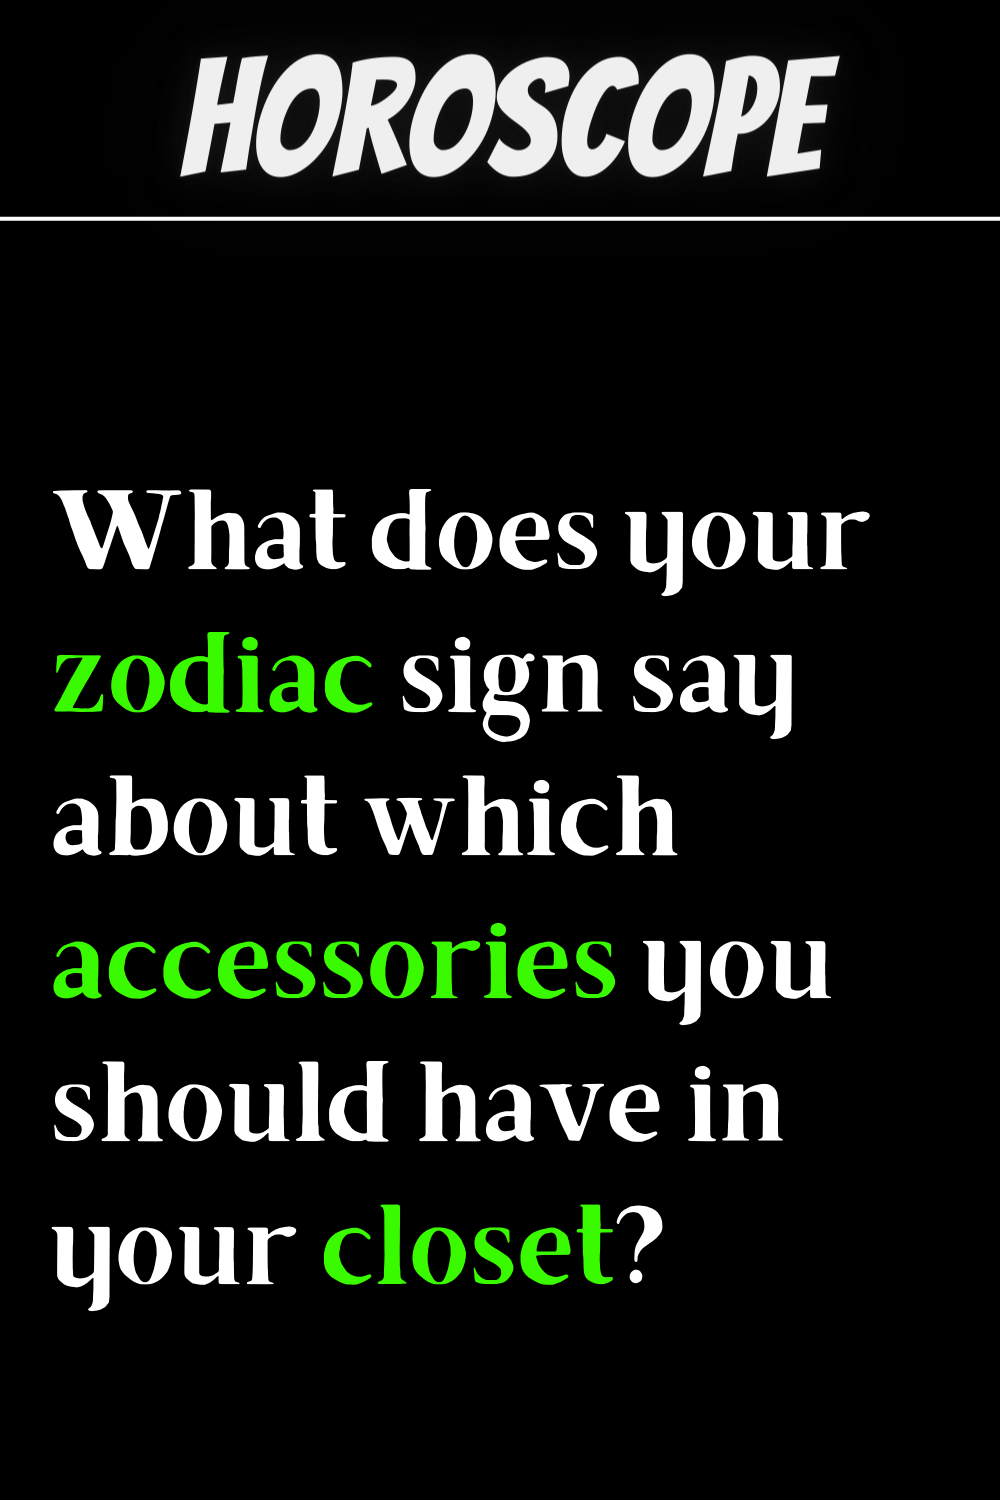 What does your zodiac sign say about which accessories you should have in your closet